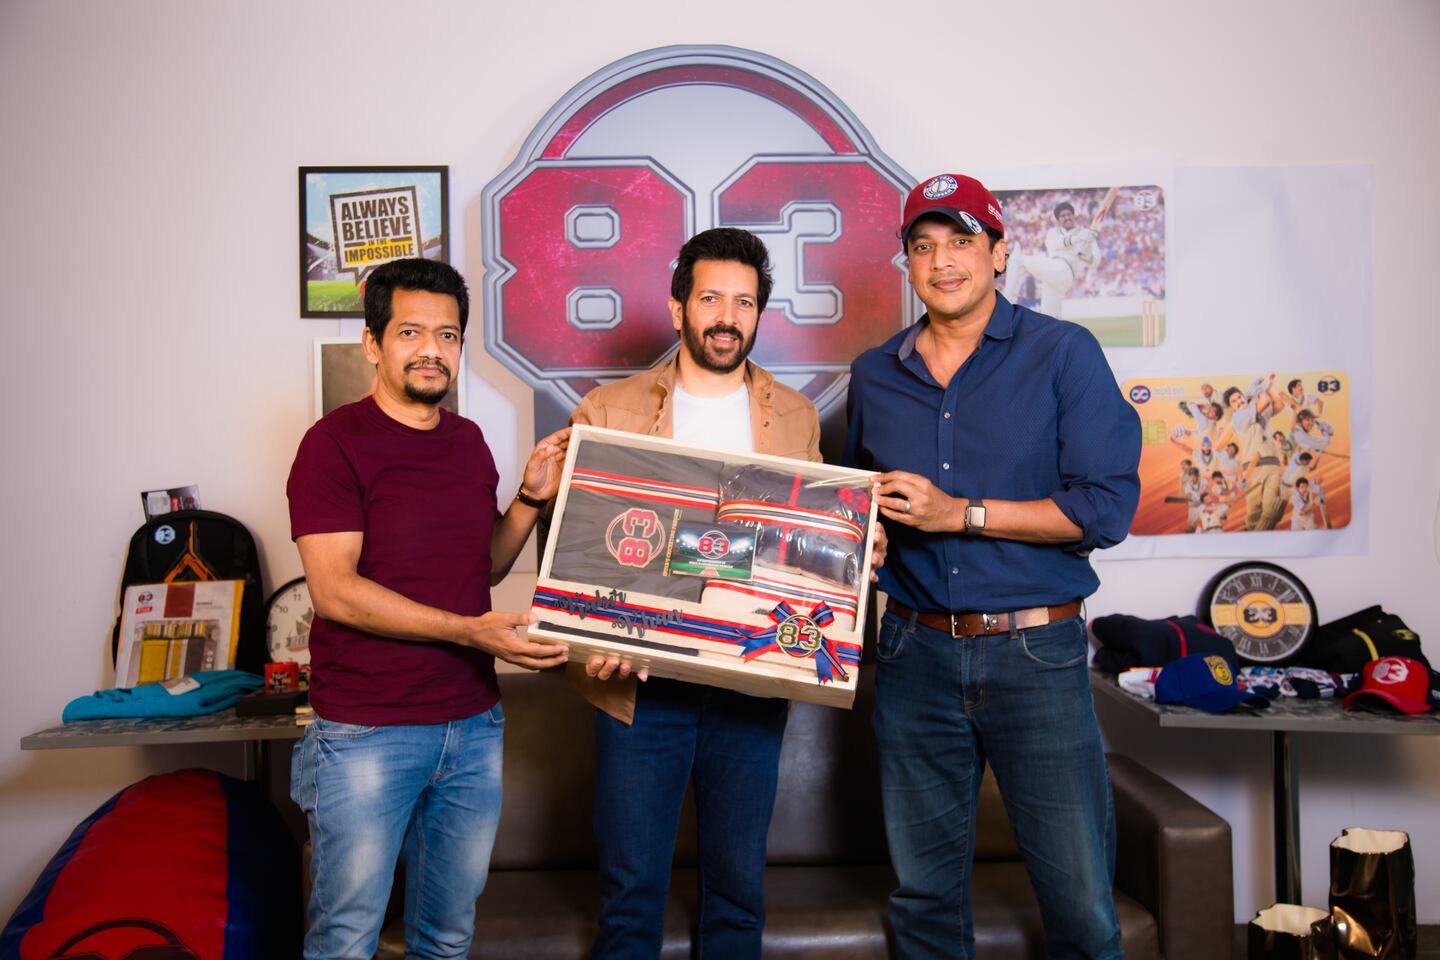 Left to Right: Shibasish Sarkar, group CEO of Reliance Entertainment; film director, Kabir Khan; Mahesh Bhupathi, tennis player and founder of SWAG Fashion. Reliance Entertainment